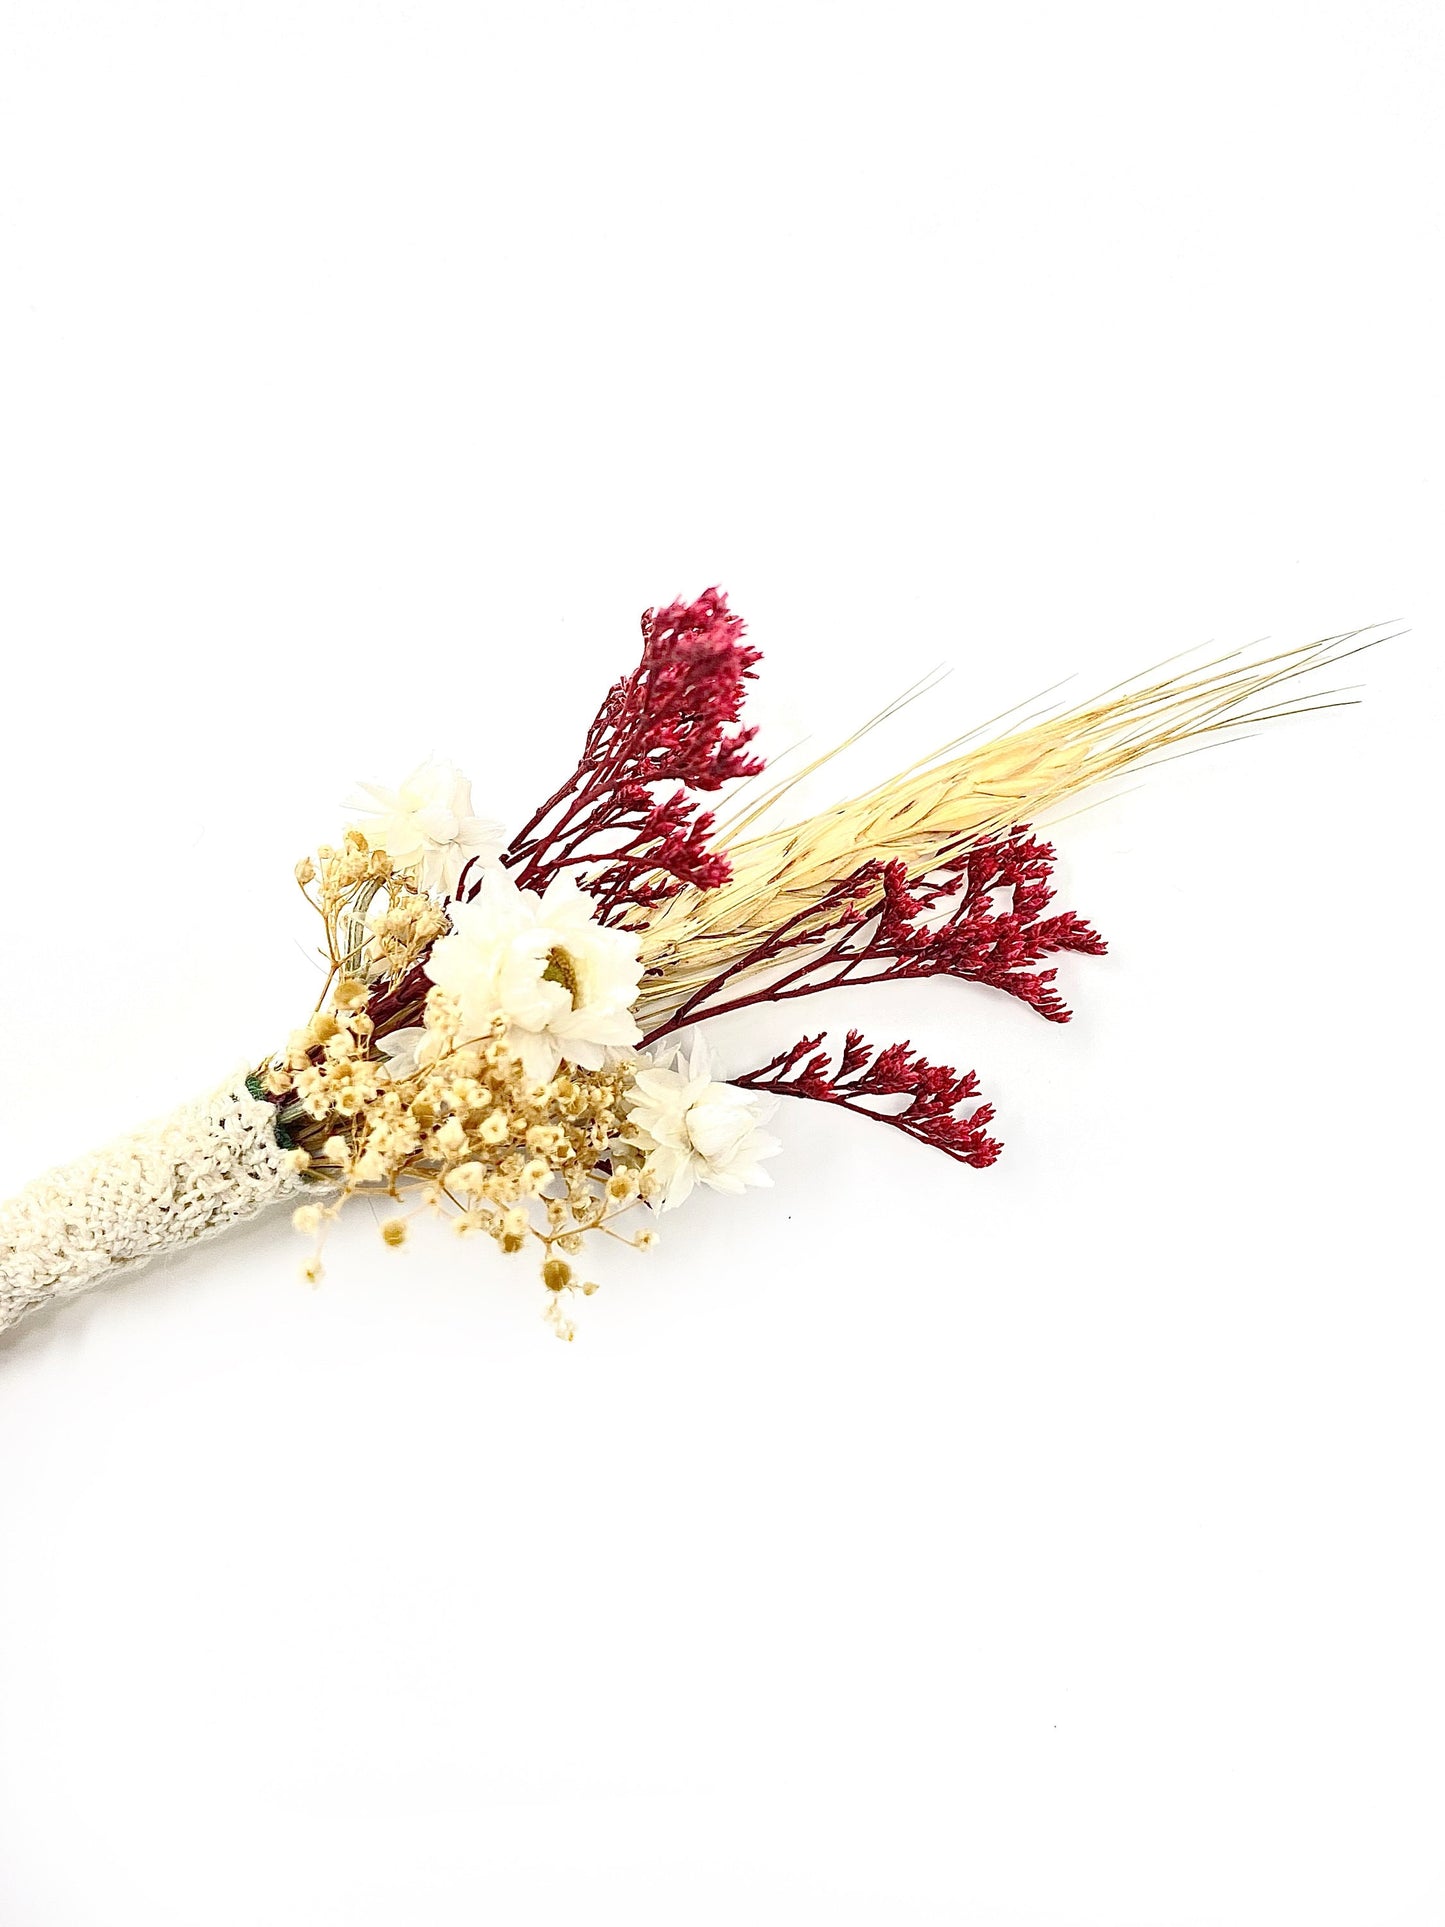 Wedding Boutonniere, Dried Flowers, Bridal Accessories, Preserved Floral, Prom, Ammobium, Red and White, Caspia